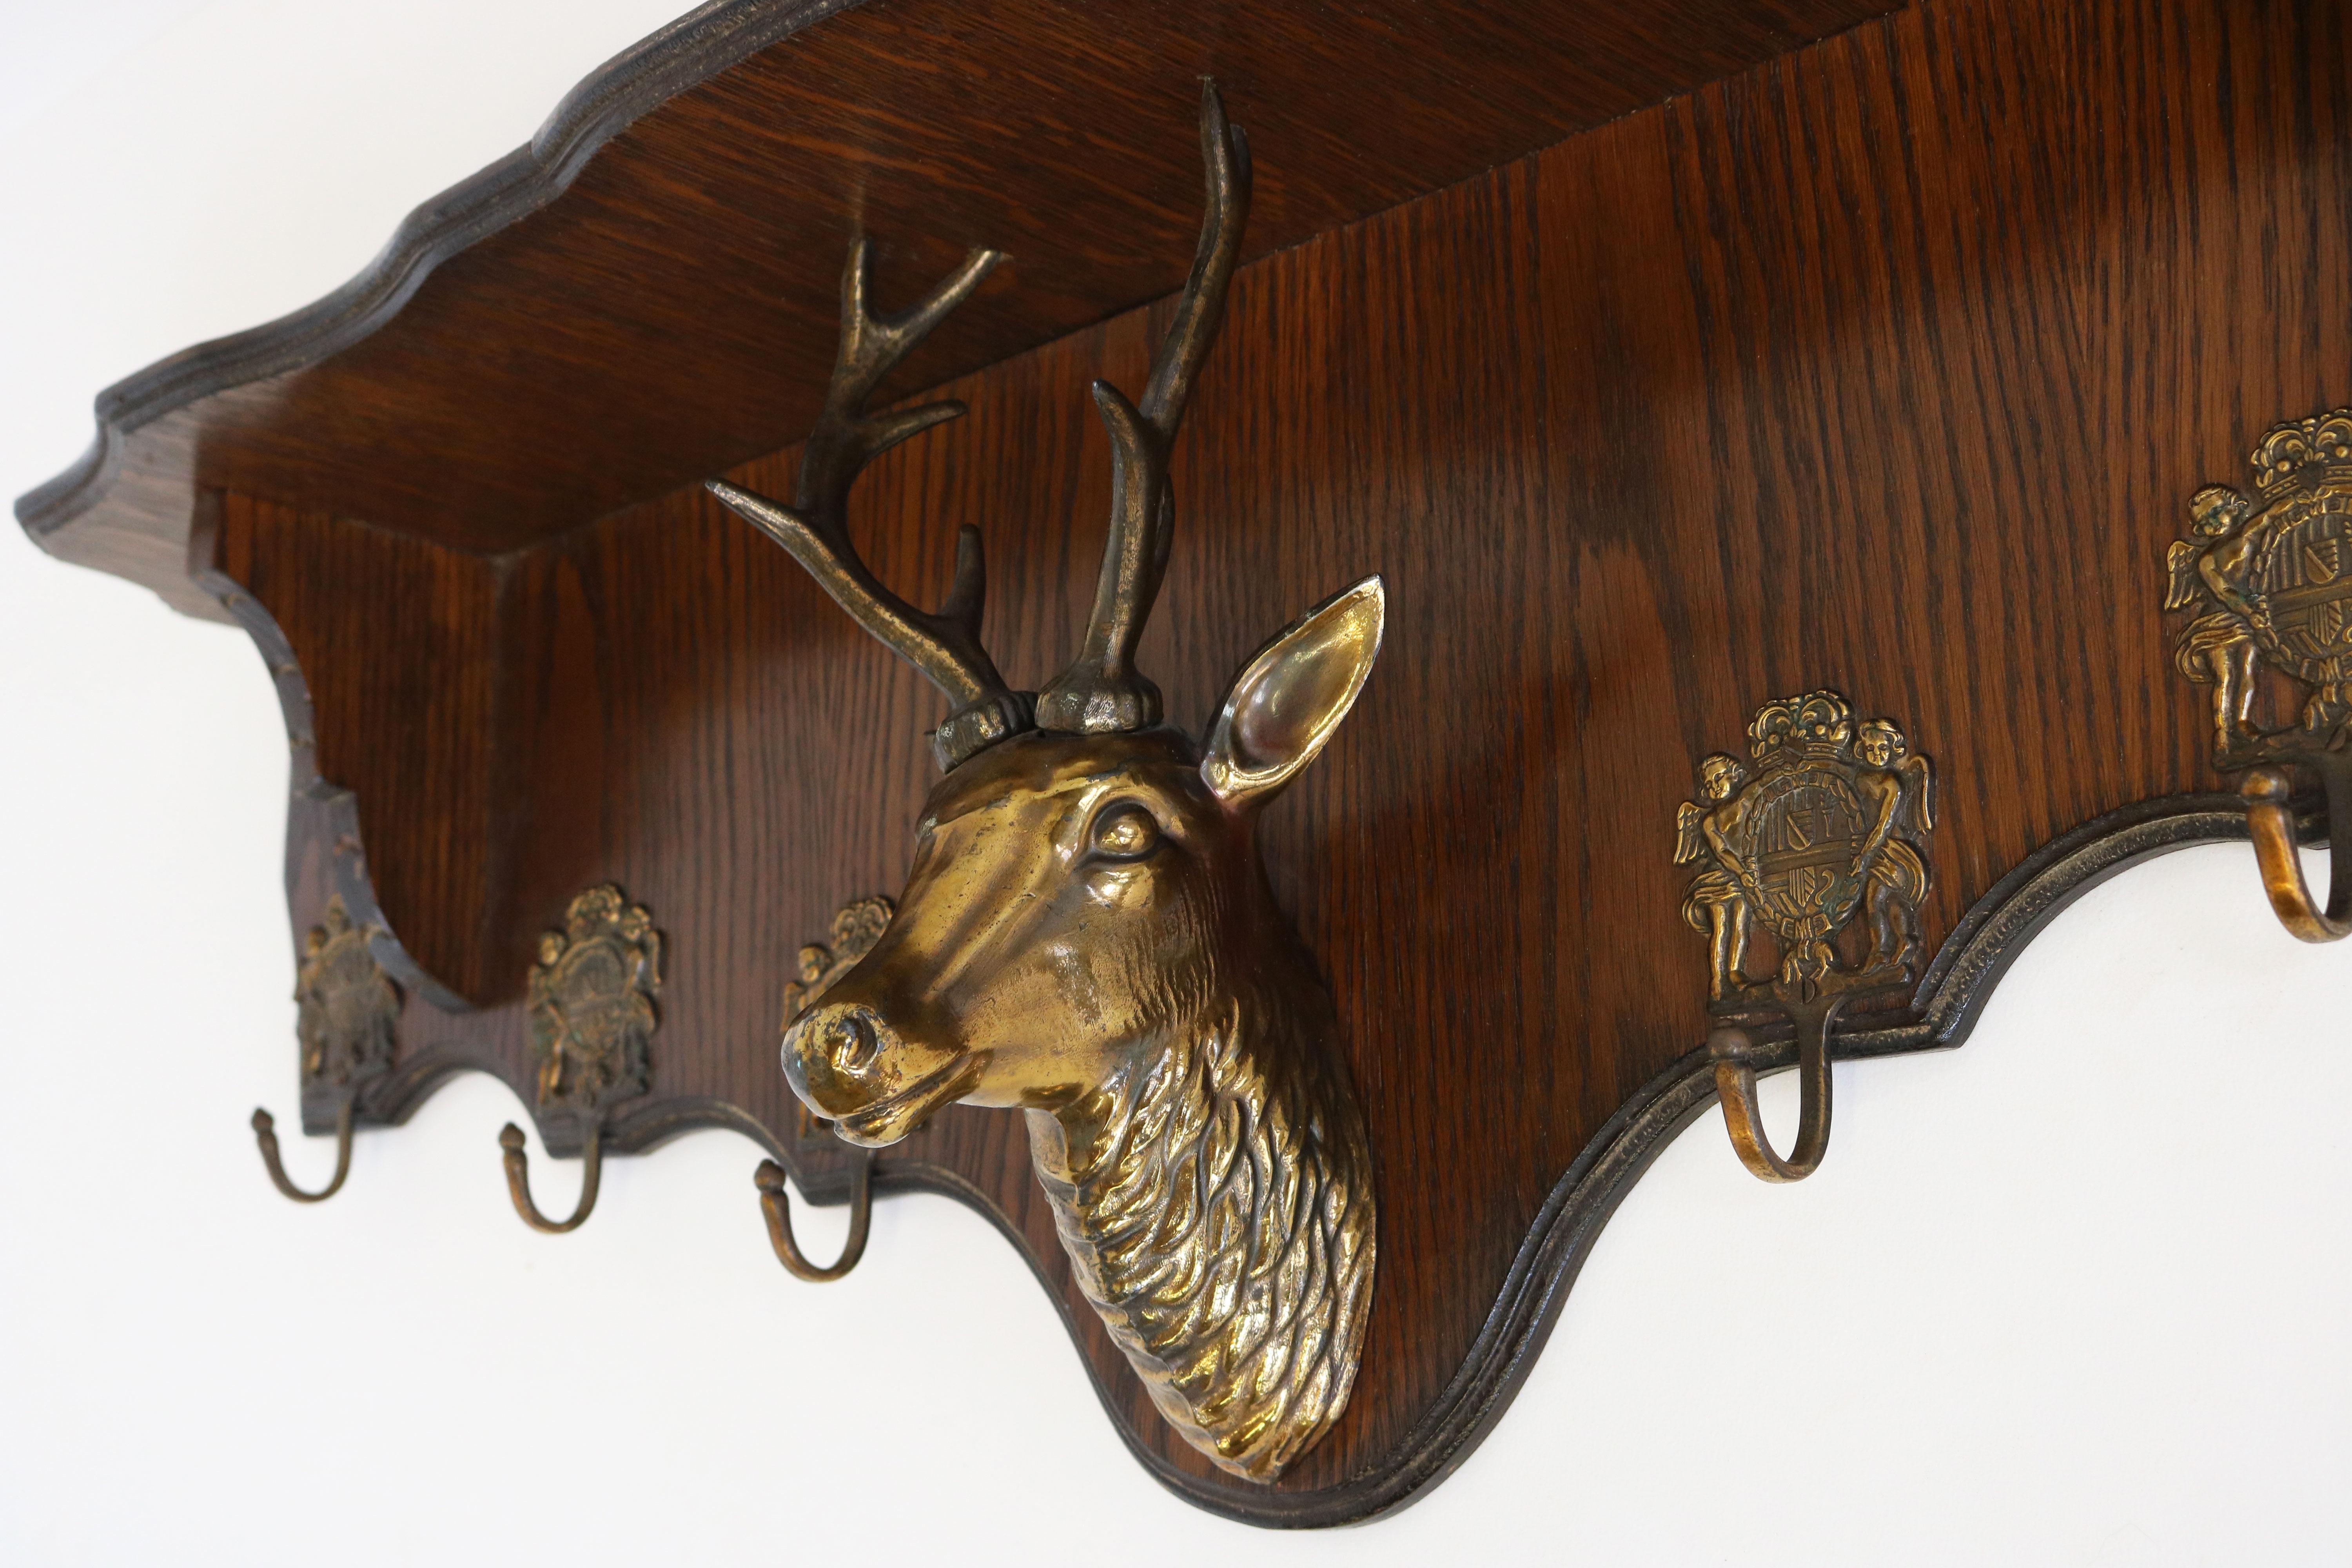 Hand-Crafted Antique French Coat Rack with Brass Deer Head 1940 Carved Oak Hat Rack Hallway For Sale